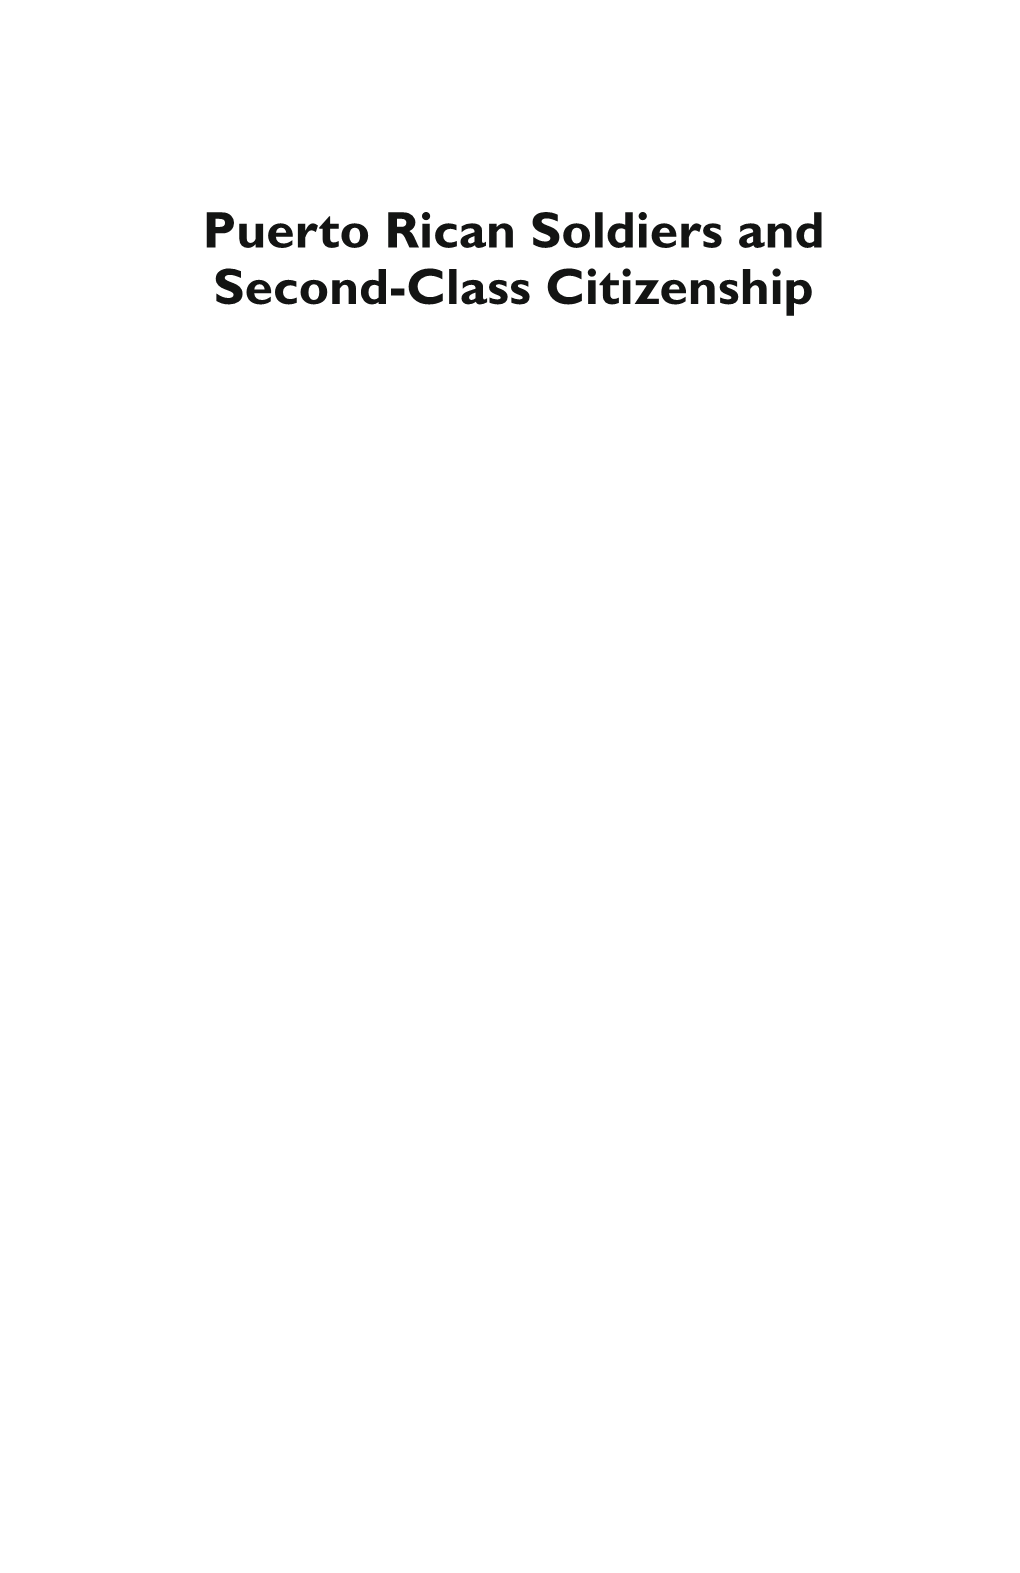 Puerto Rican Soldiers and Second-Class Citizenship This Page Intentionally Left Blank Puerto Rican Soldiers and Second-Class Citizenship Representations in Media